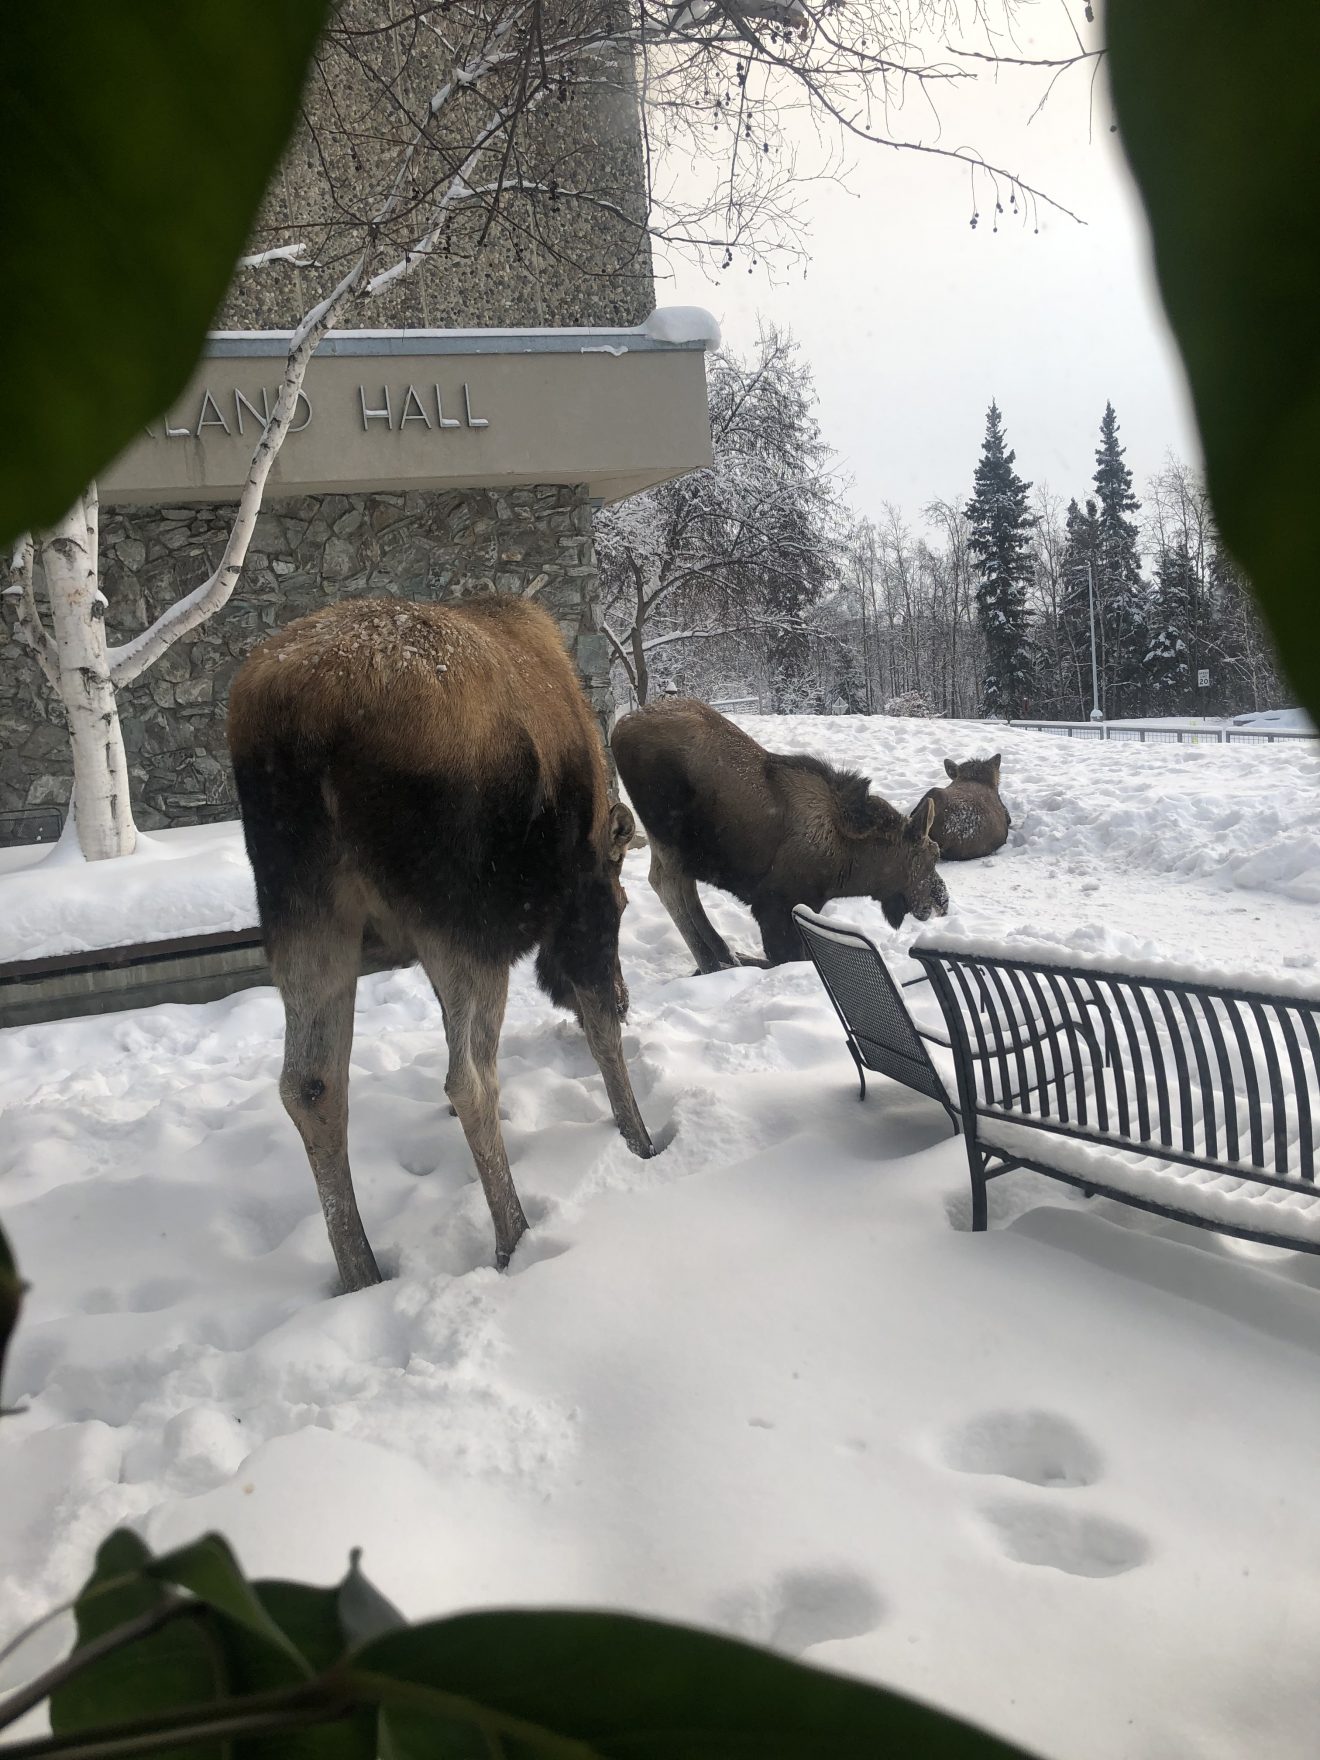 Three moose: one standing, one kneeling, one lying in the snow. Curtains and part of an indoor plant can be seen in the foreground.